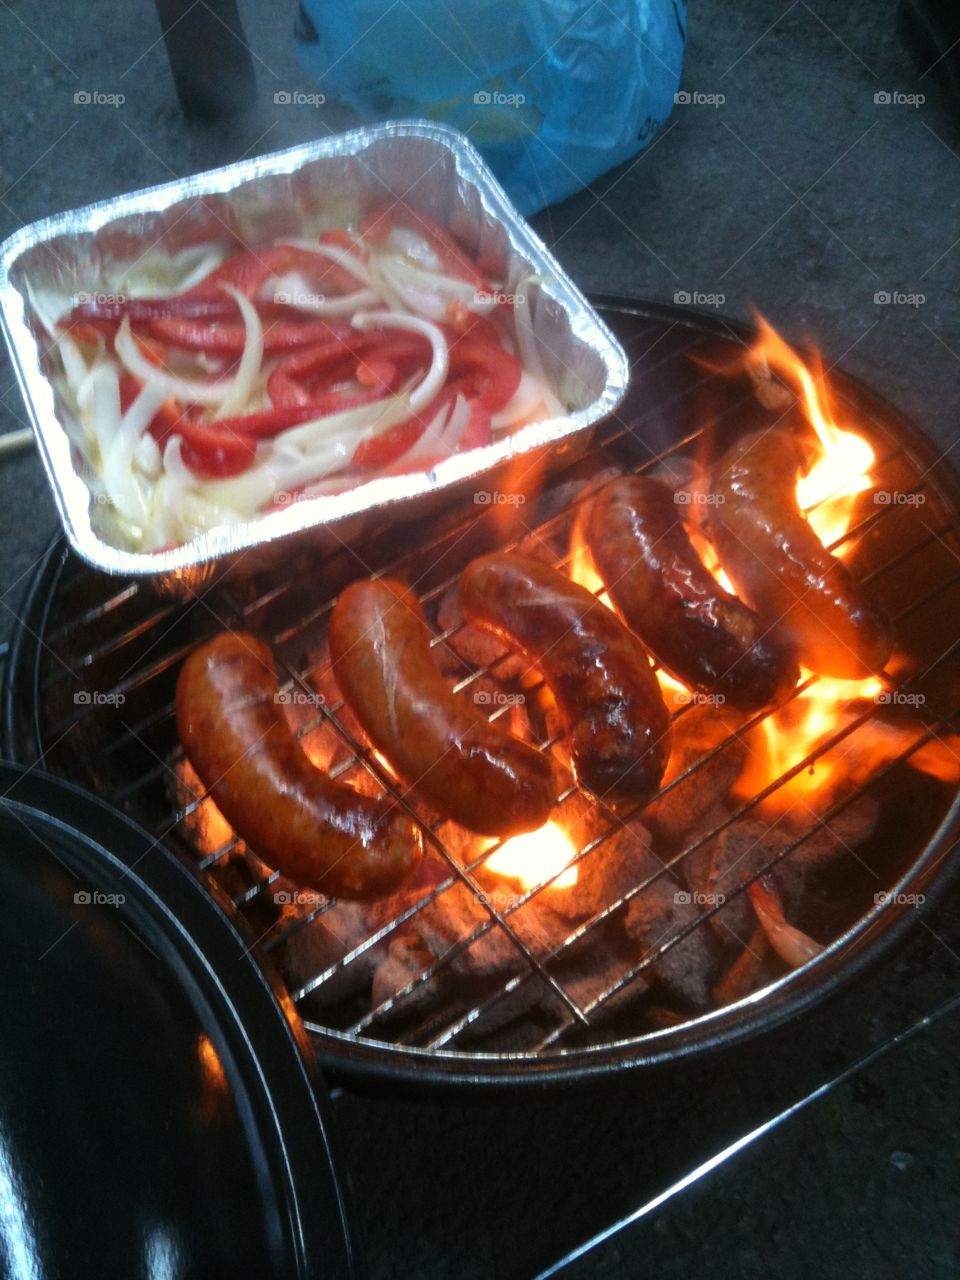 Tailgating at the Steelers game. Cooking Italian sausages, peppers and onions on the grill. 